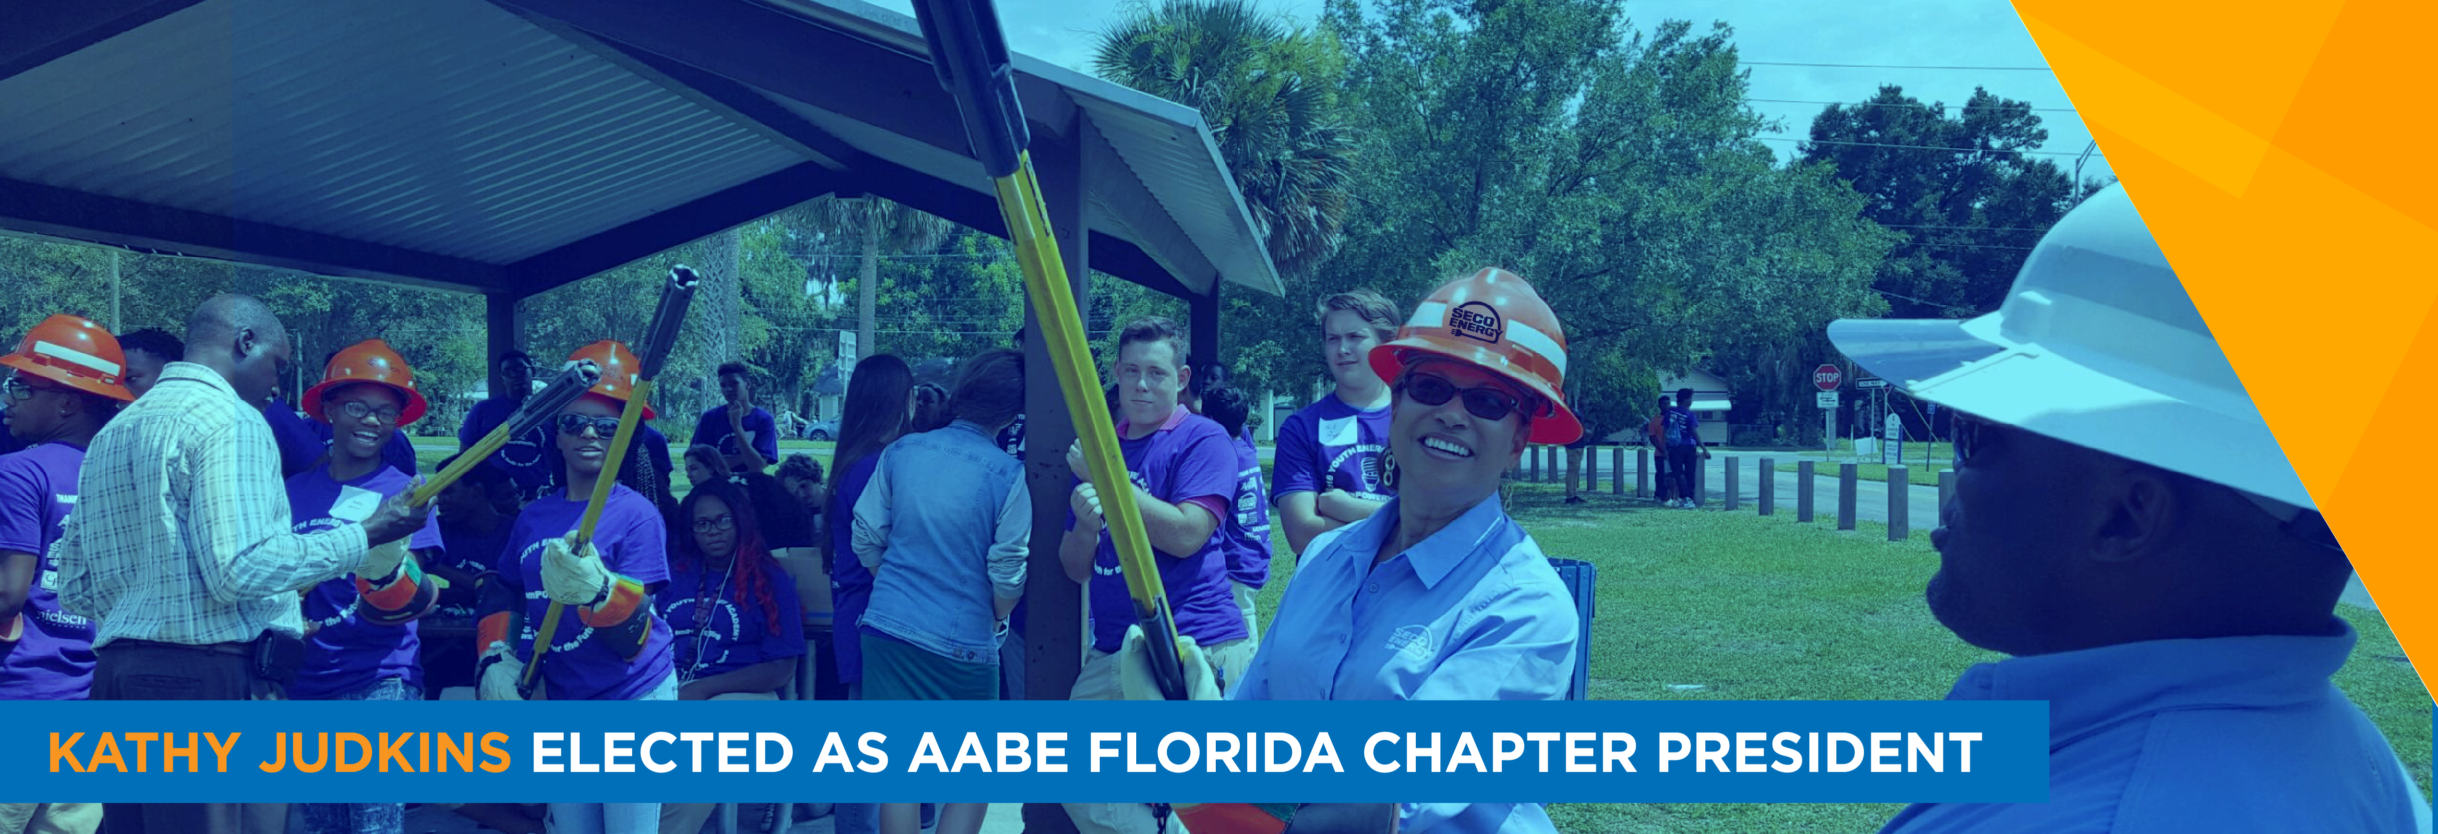 Kathy Judkins Elected as AABE Florida Chapter President